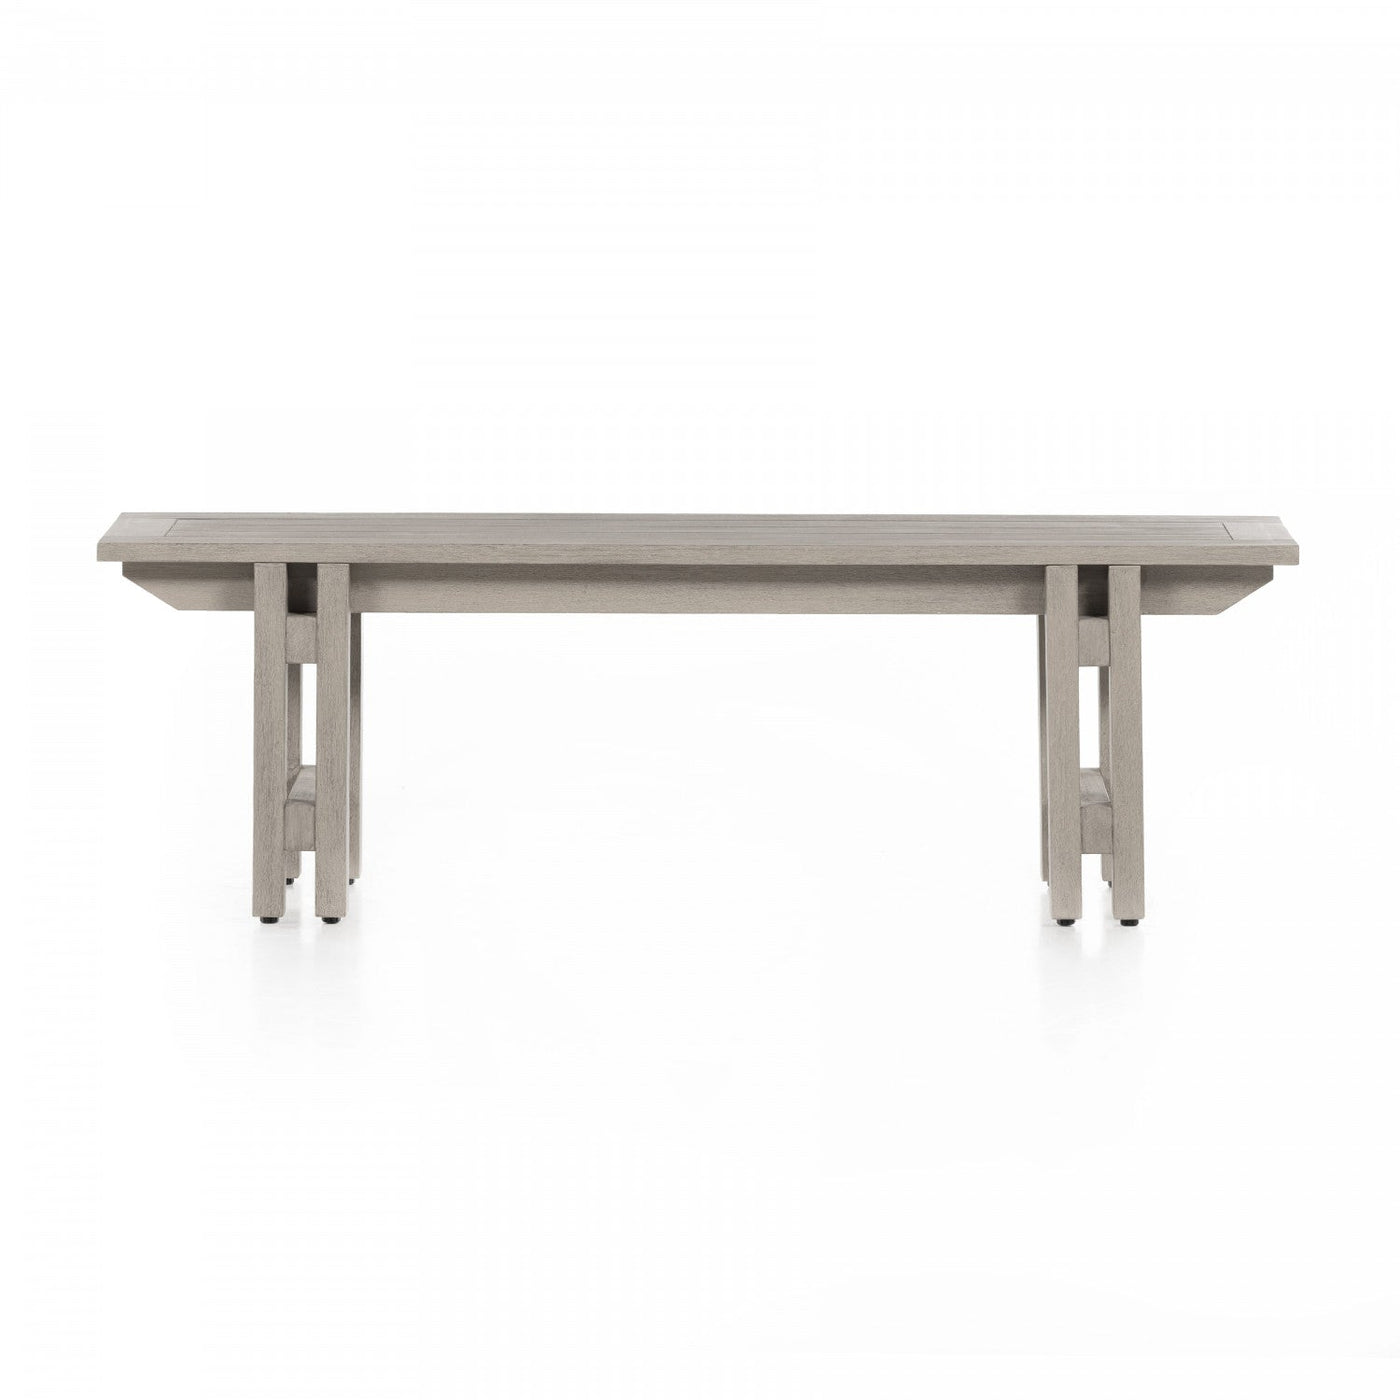 BALFOUR OUTDOOR DINING BENCH,WEATHERED GRE